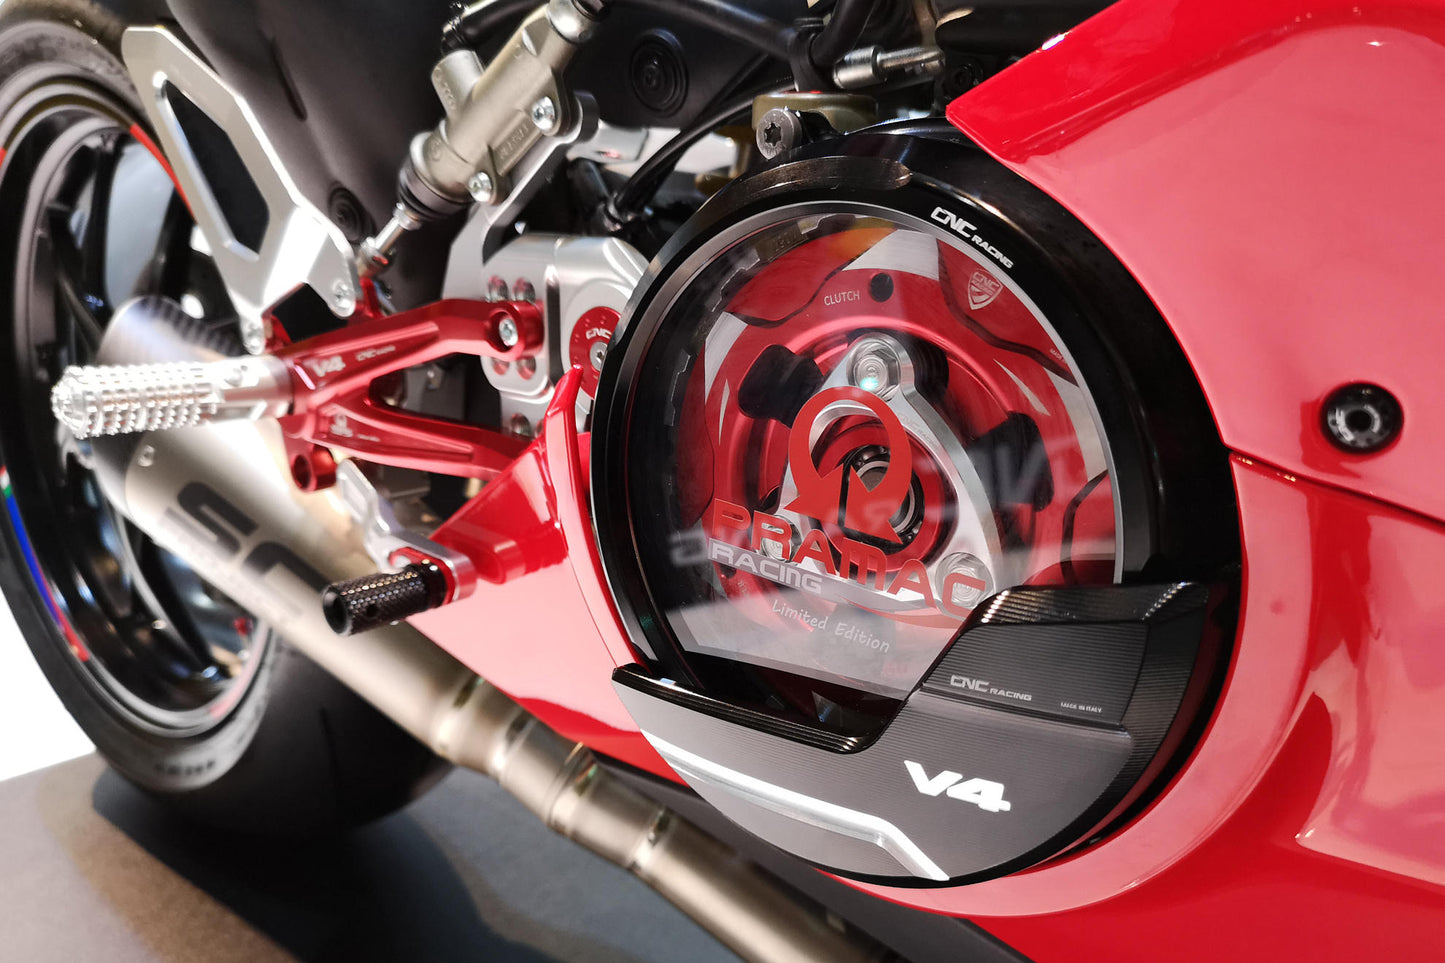 Panigale V4 - Clutch Cover - Averys Motorcycles